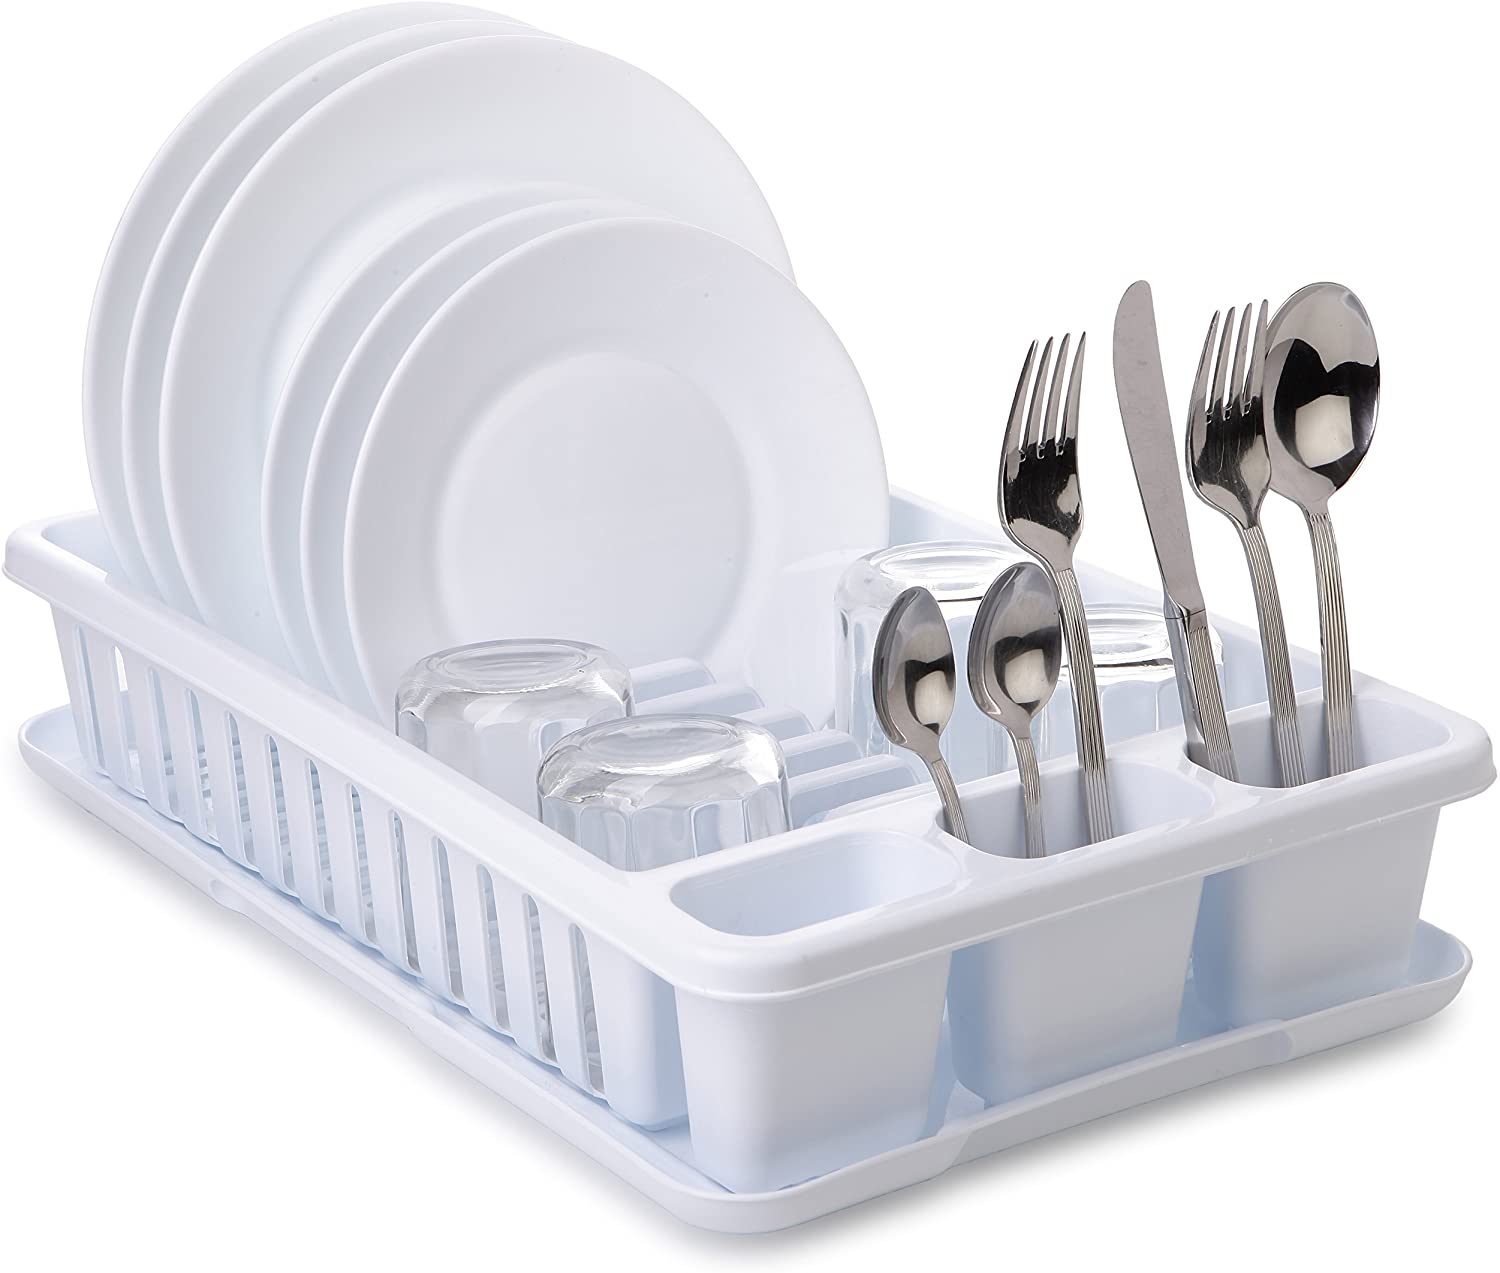 Plate Drying Rack With Tray